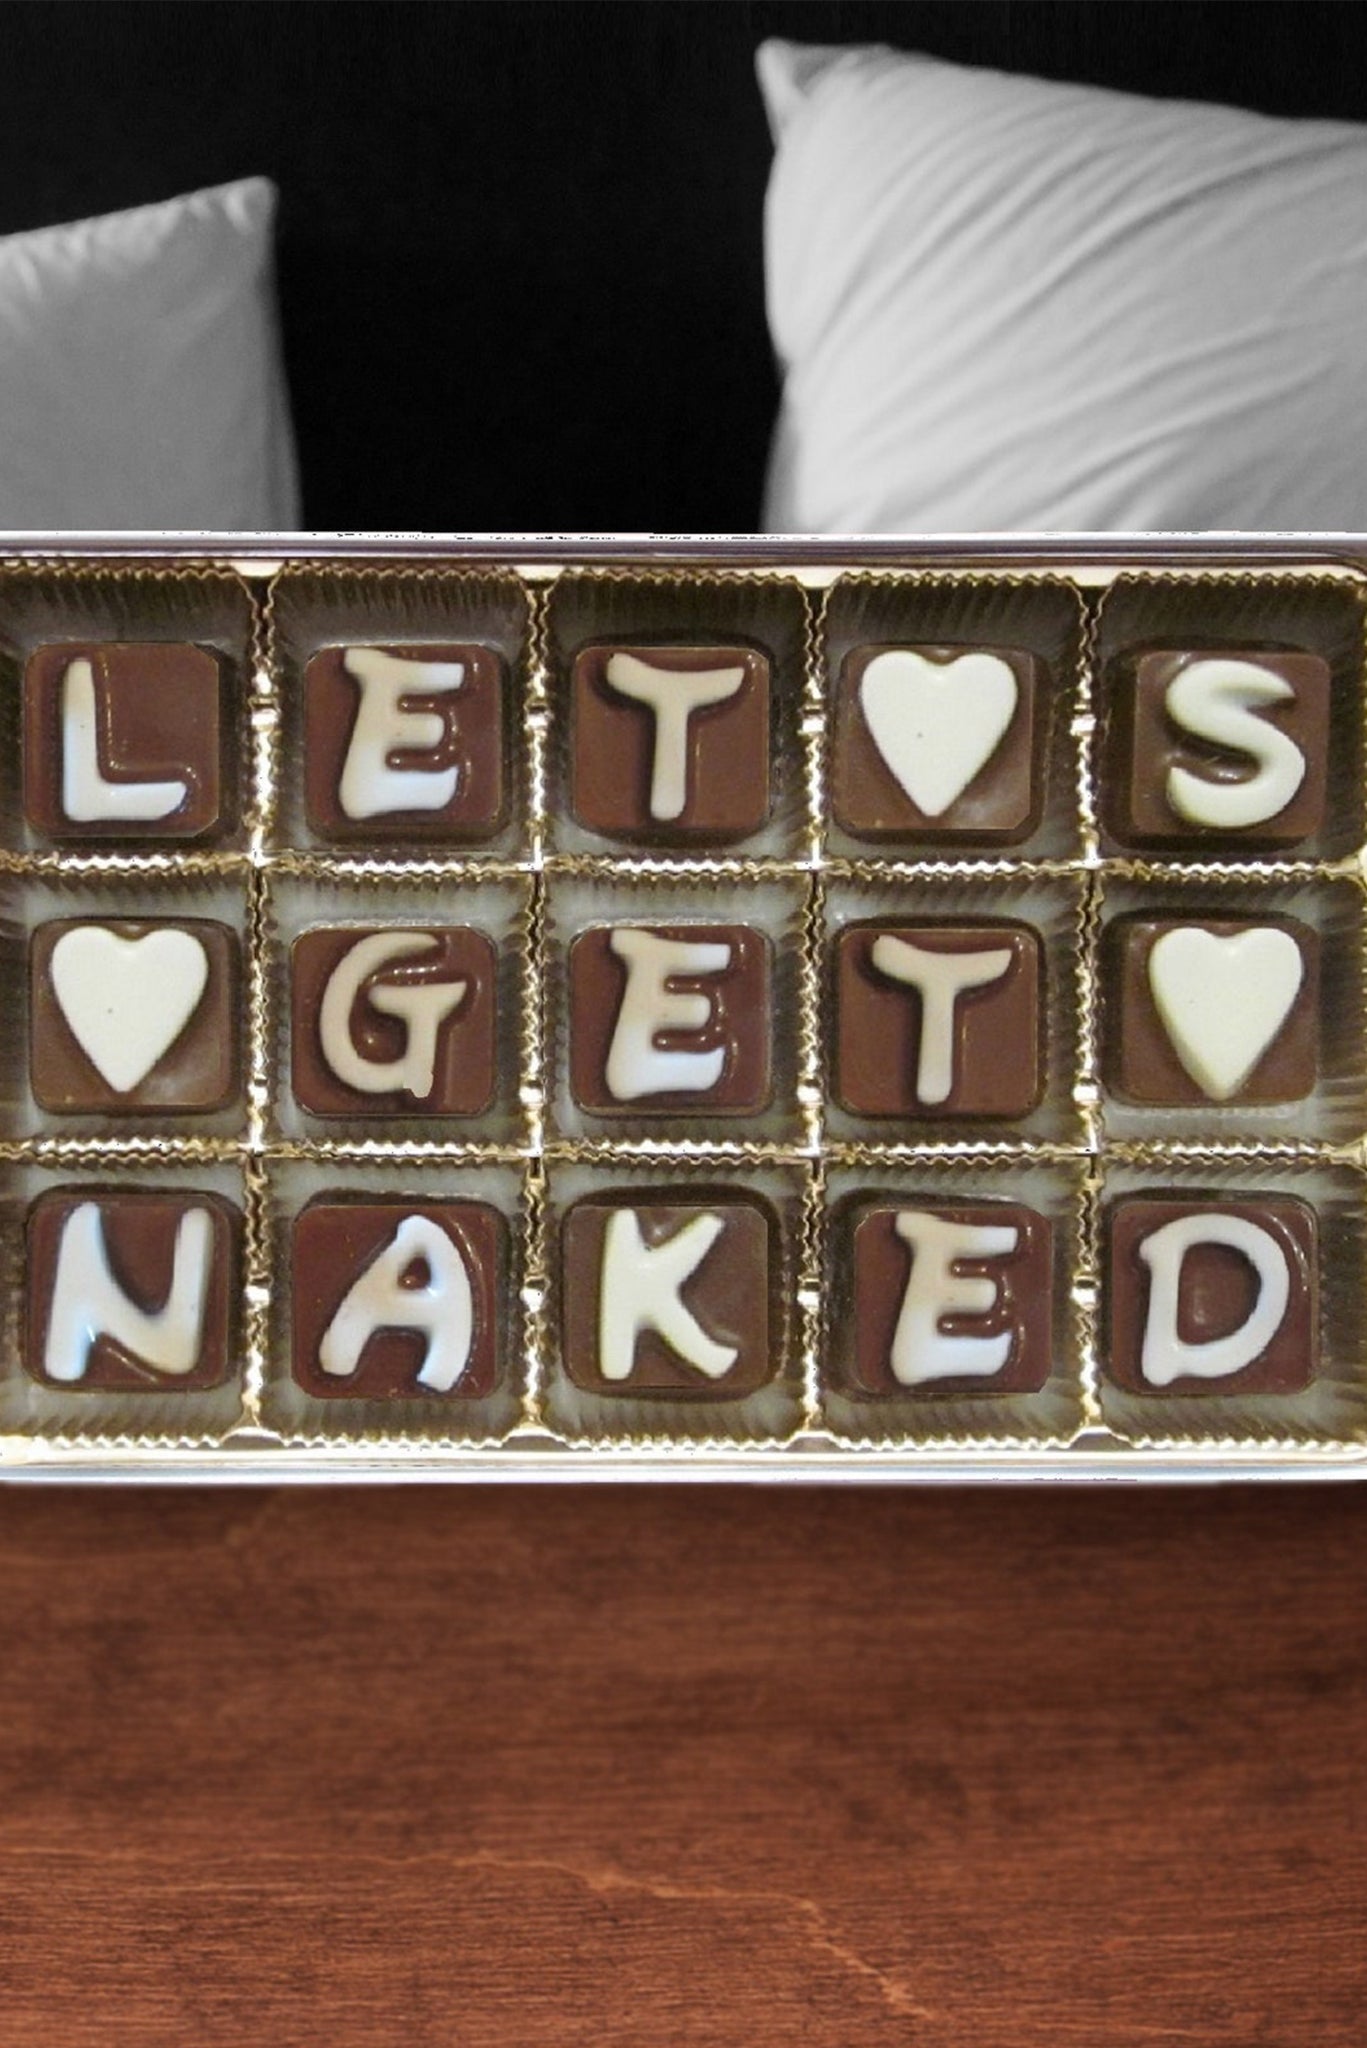 Cheeky Lingerie! | Valentine's Day Cookie Box for Her